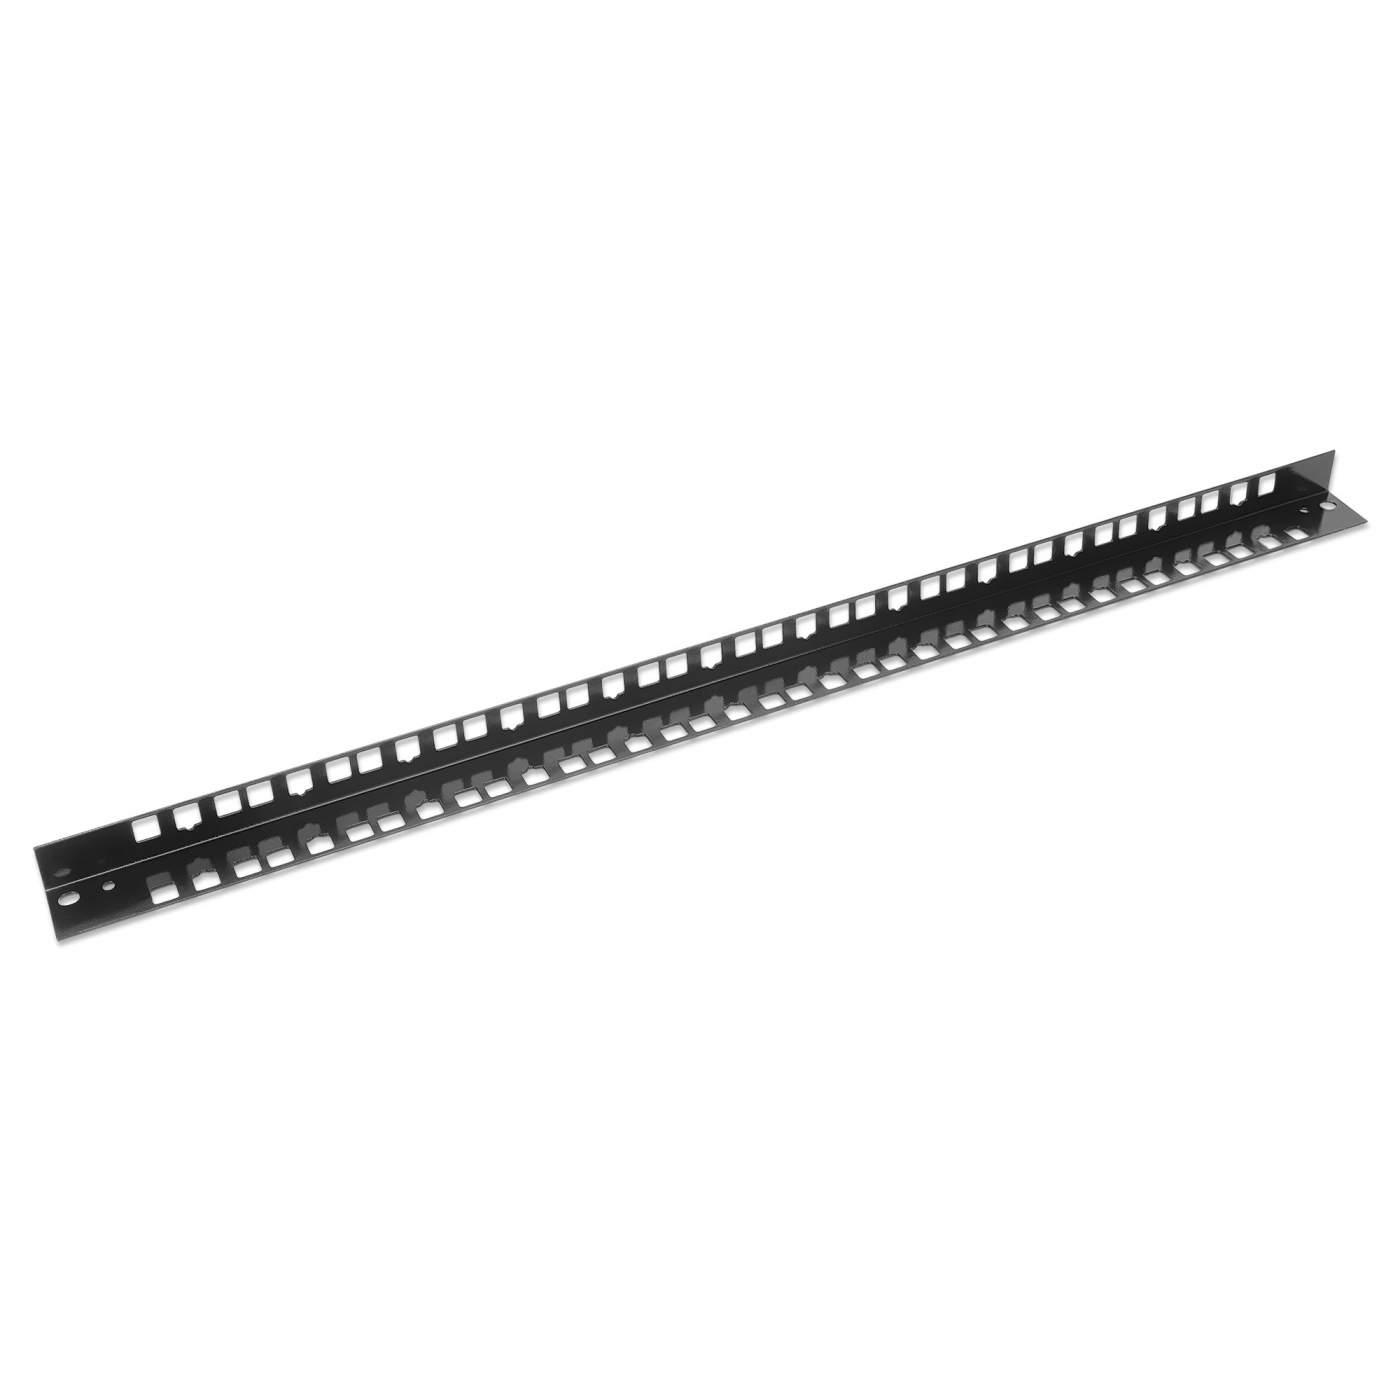 Spare Rails for 19" Wallmount Cabinets, 15U Image 2